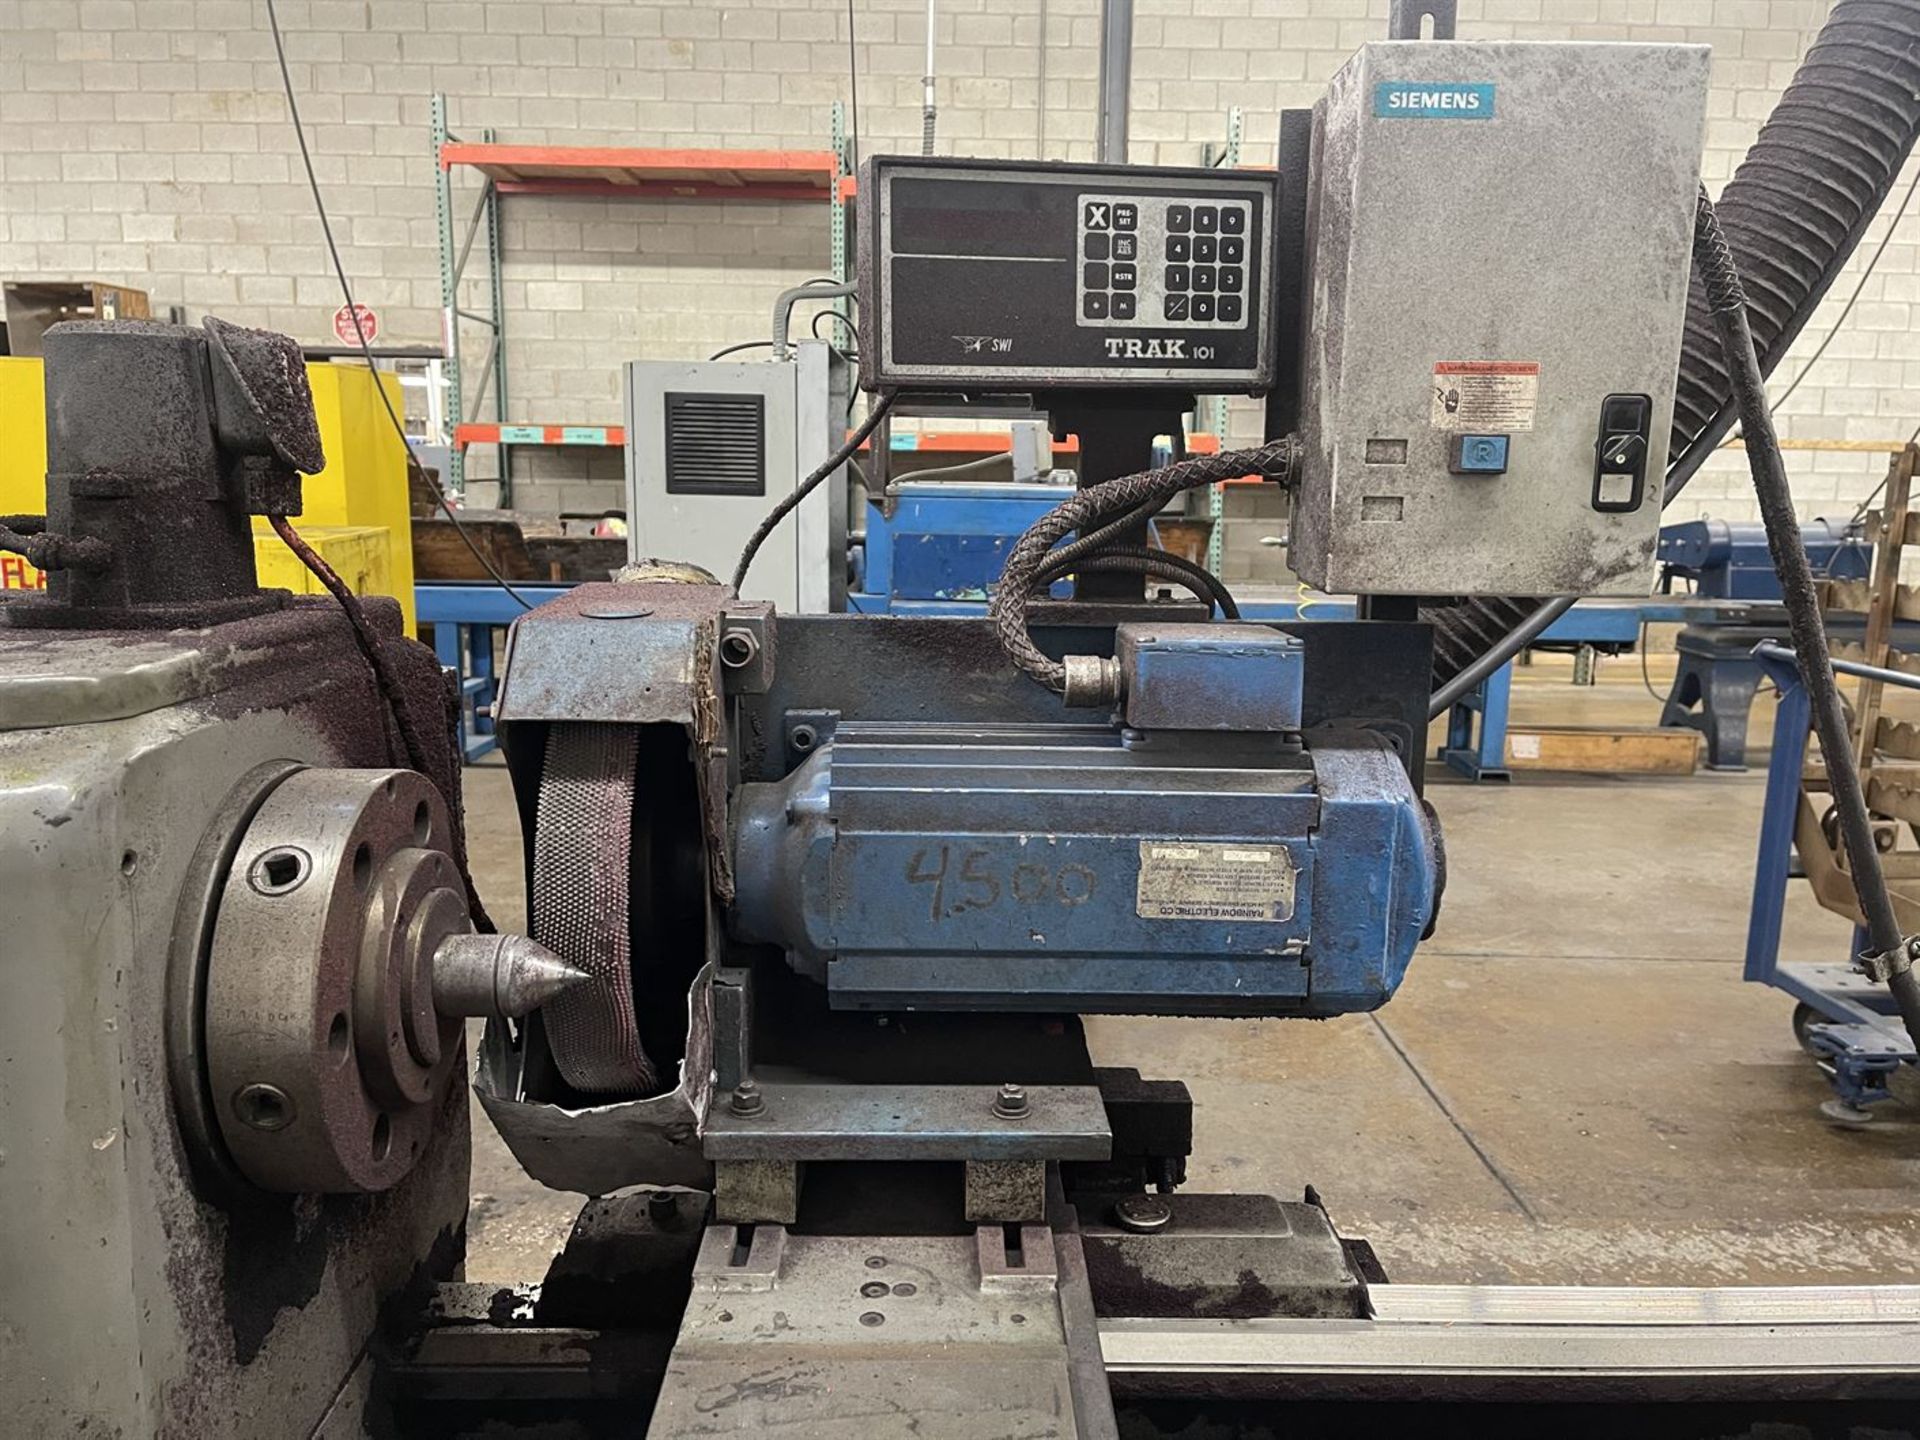 MORANDO PA30 Roll Grinder/Lathe, s/n 055658606, 24" Swing, 120" Between Centers, 20-2000 RPM, - Image 5 of 7